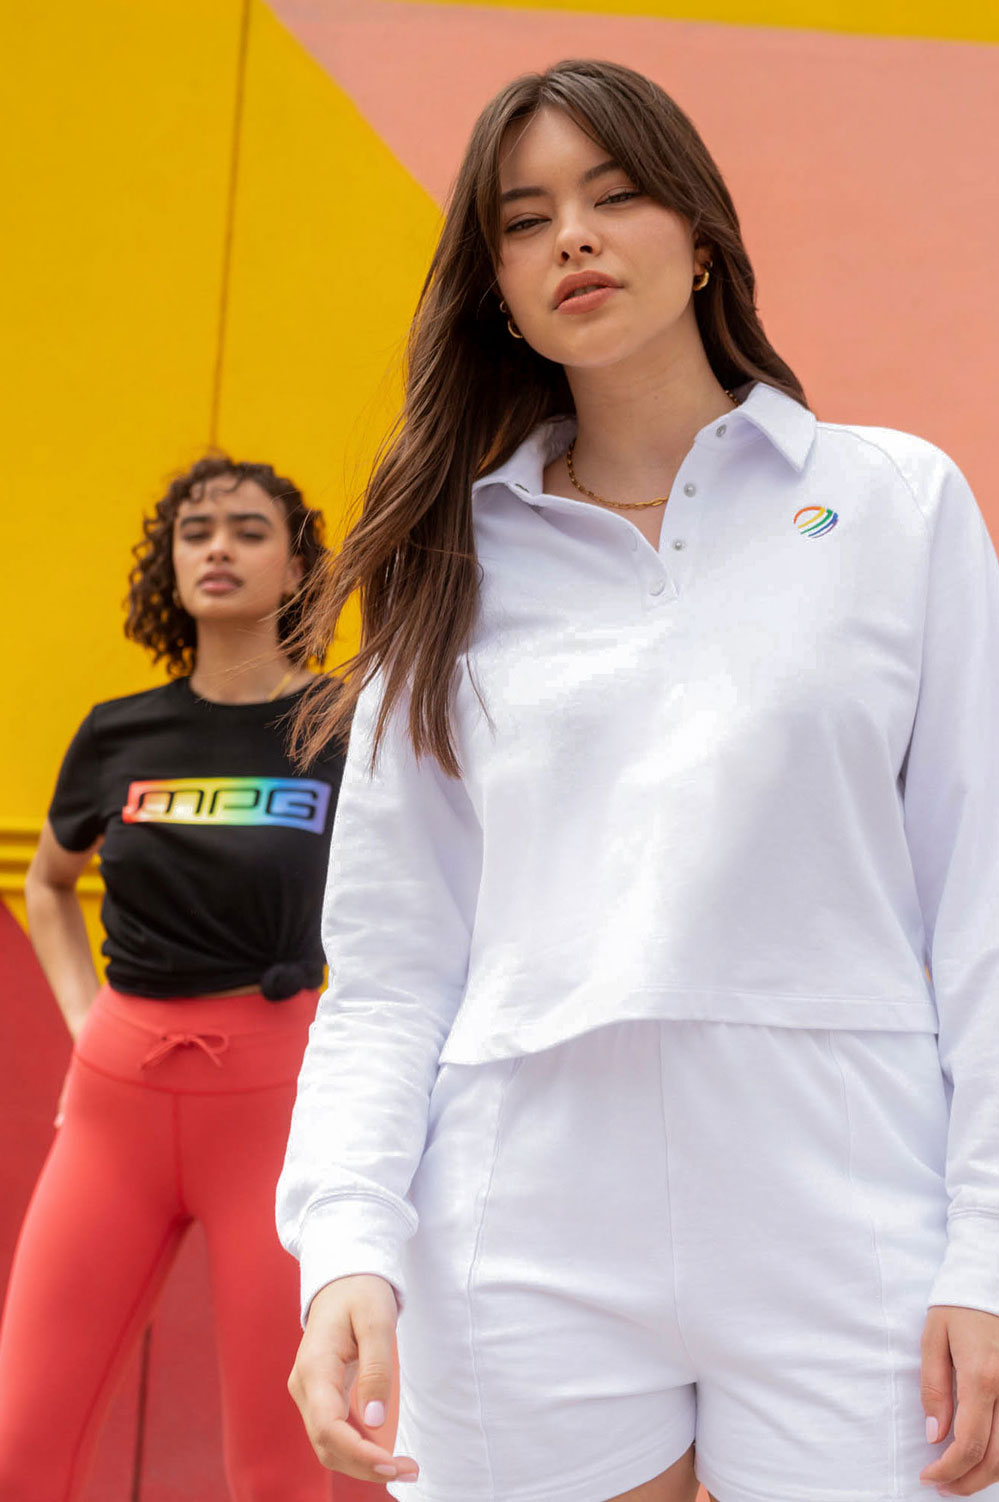 Two gay females posing in MPG Pride collection t-shirts, one girl is in the background